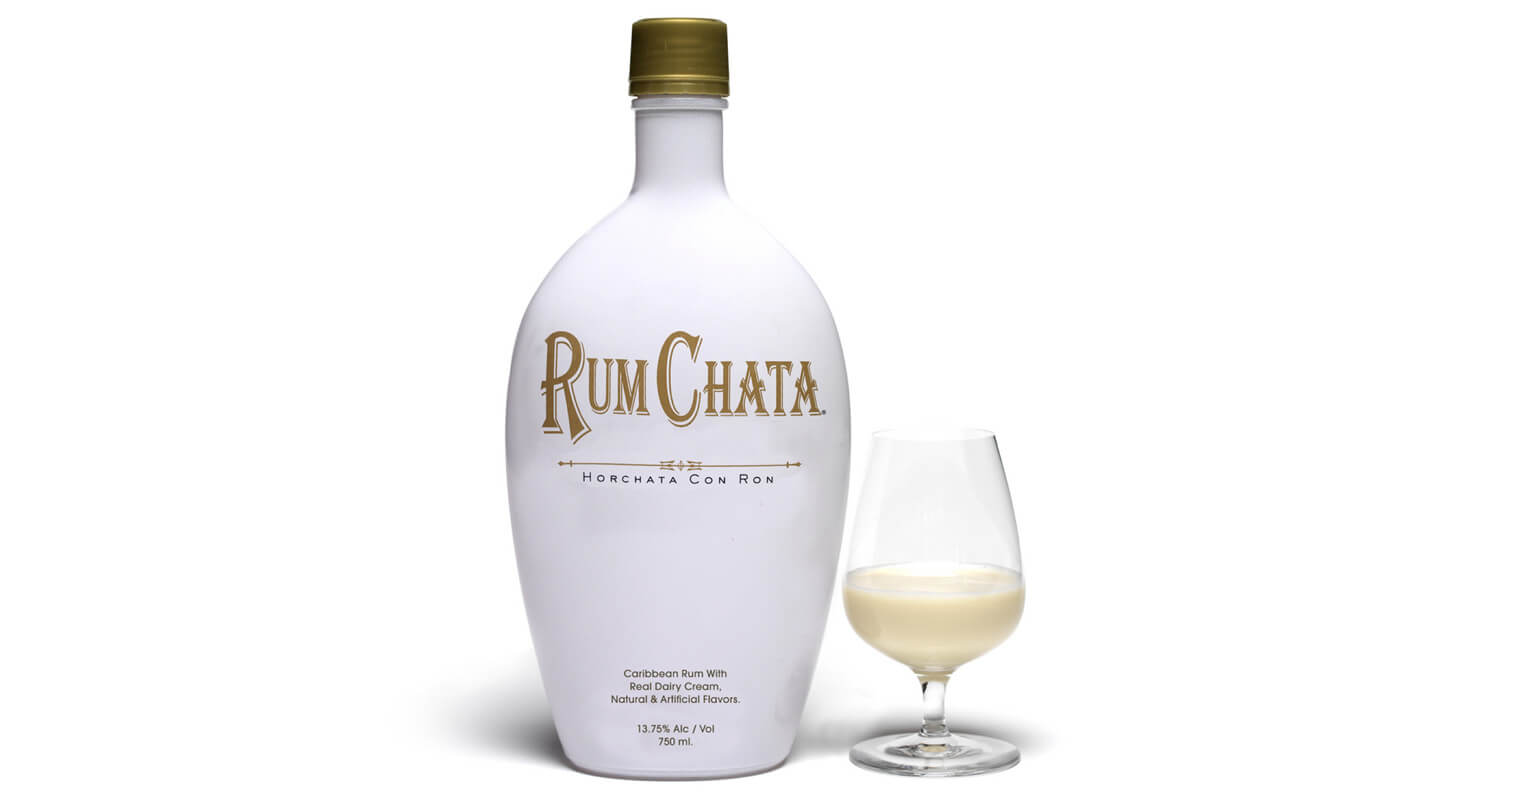 Bacardi to Distribute RumChata in Mexico, industry news, featured image